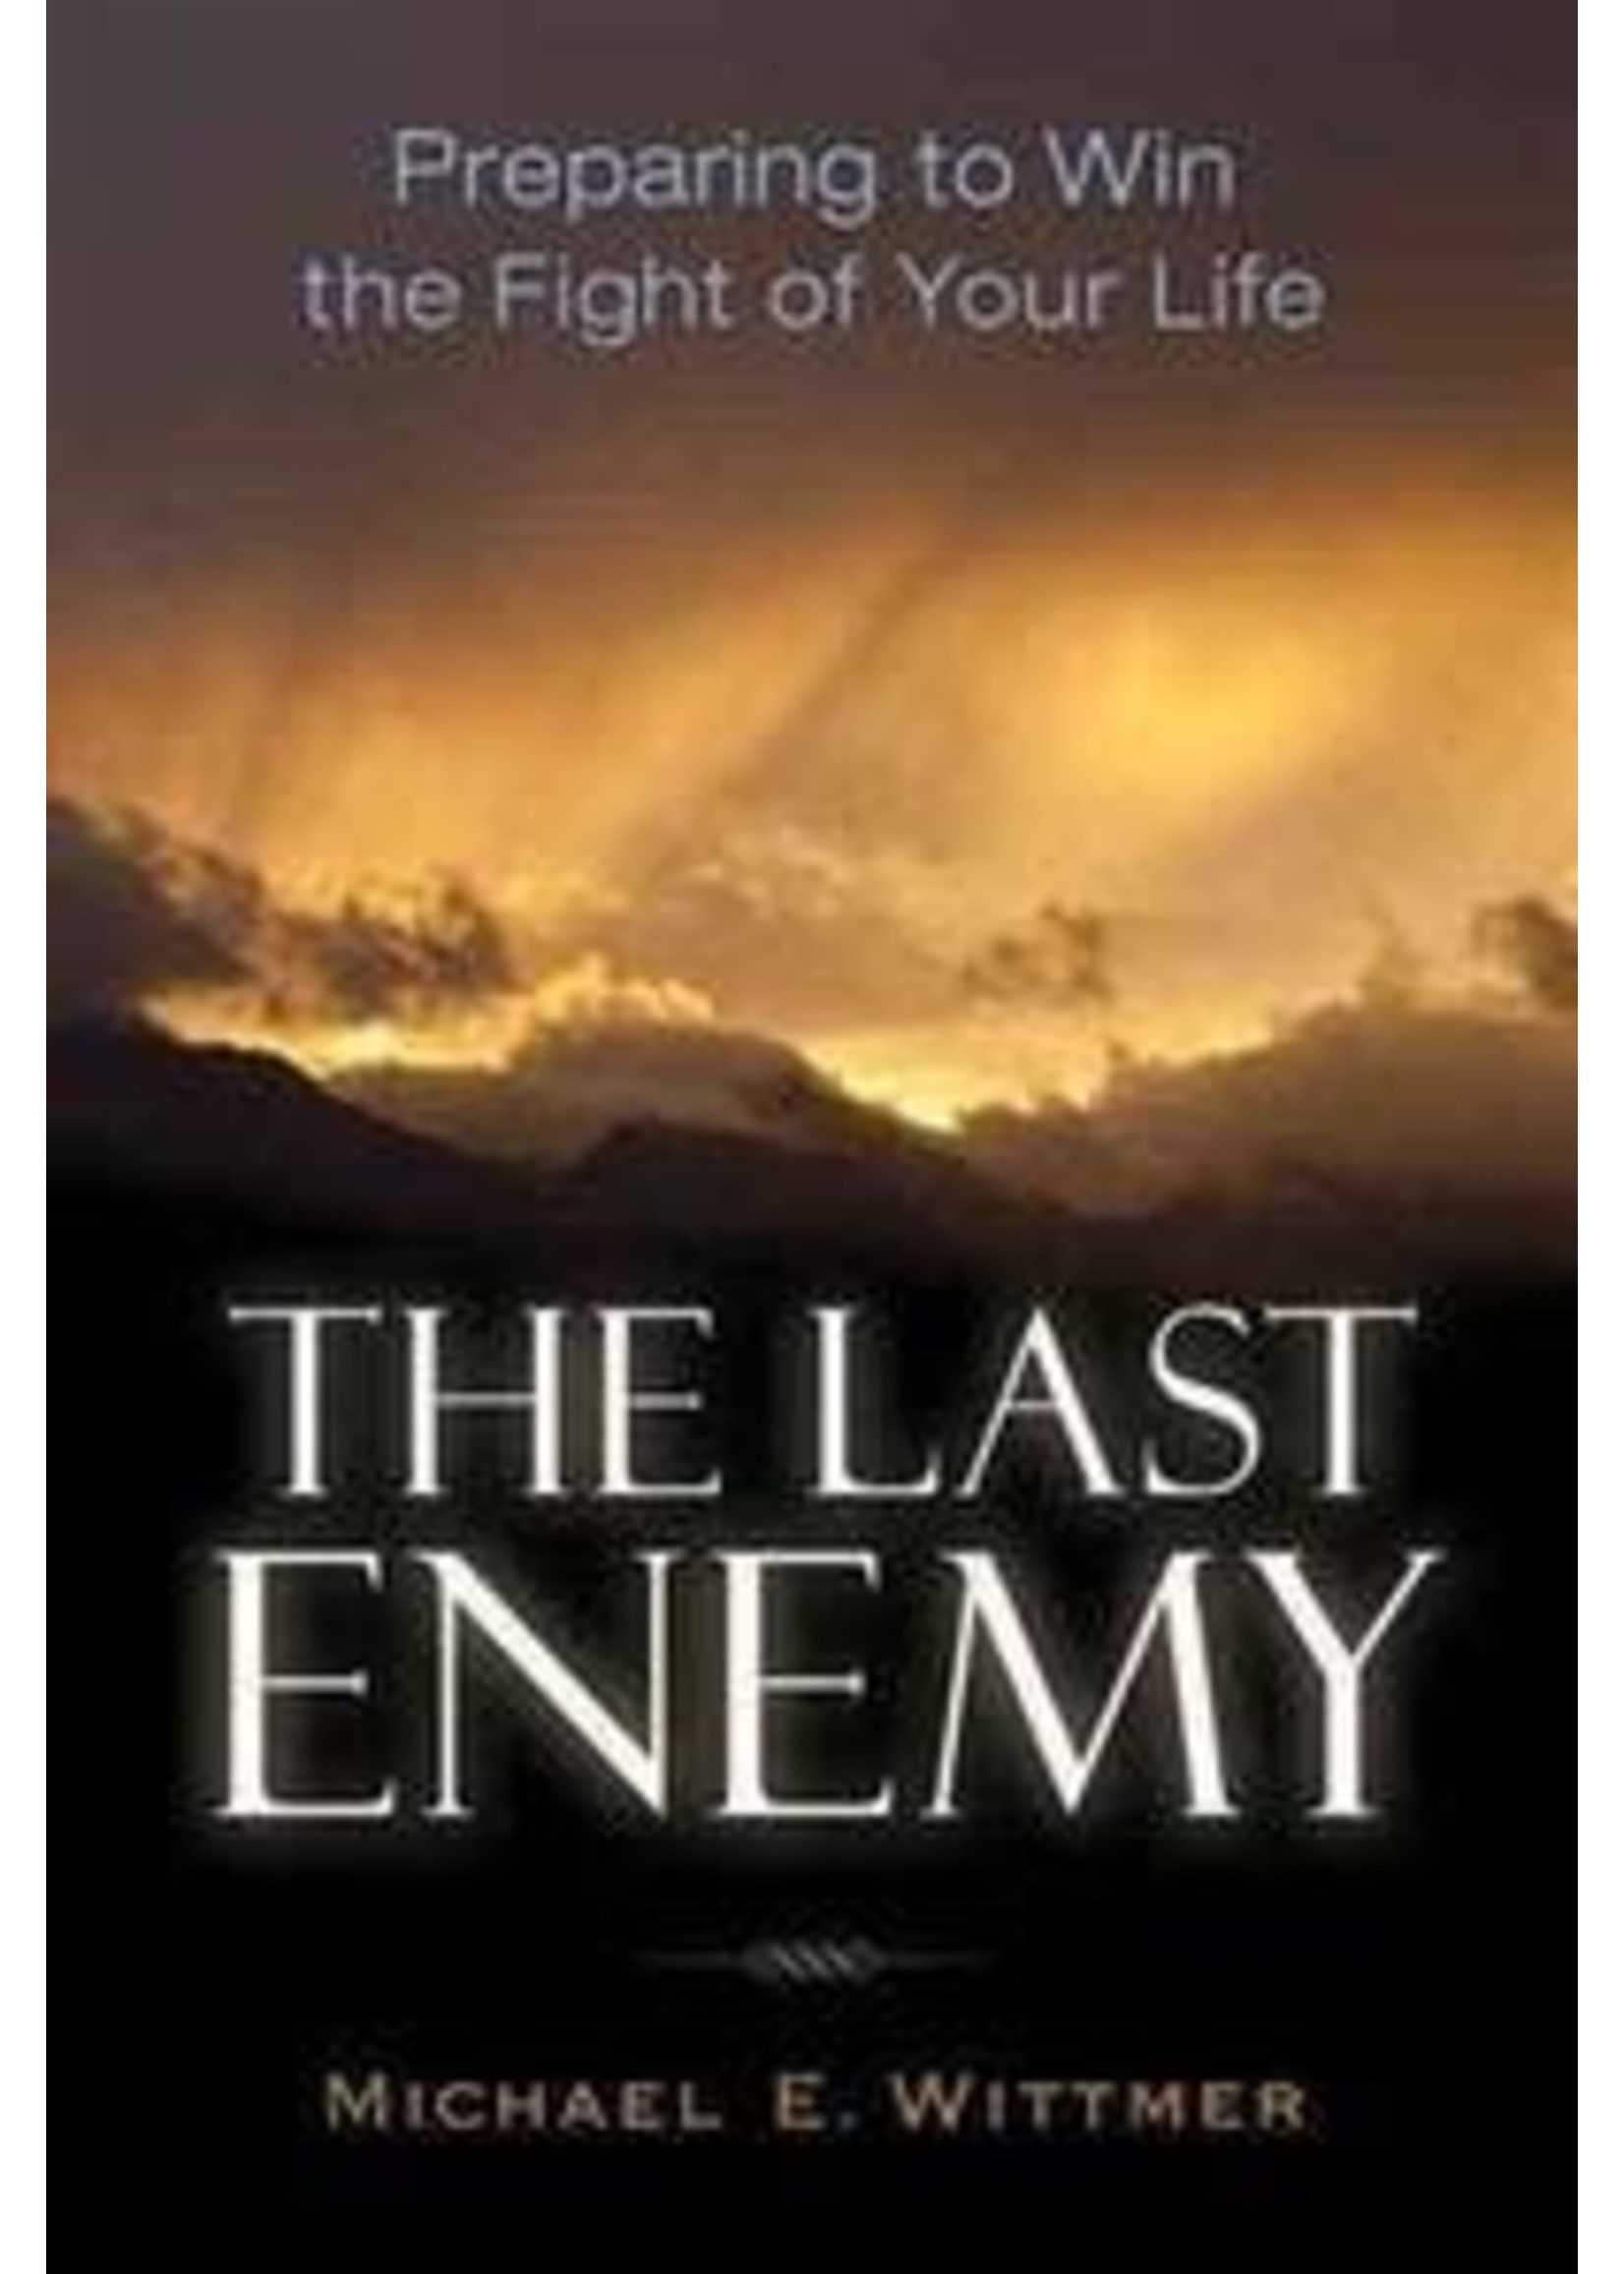 The Last Enemy: Preparing to Win The Fight of Your Life